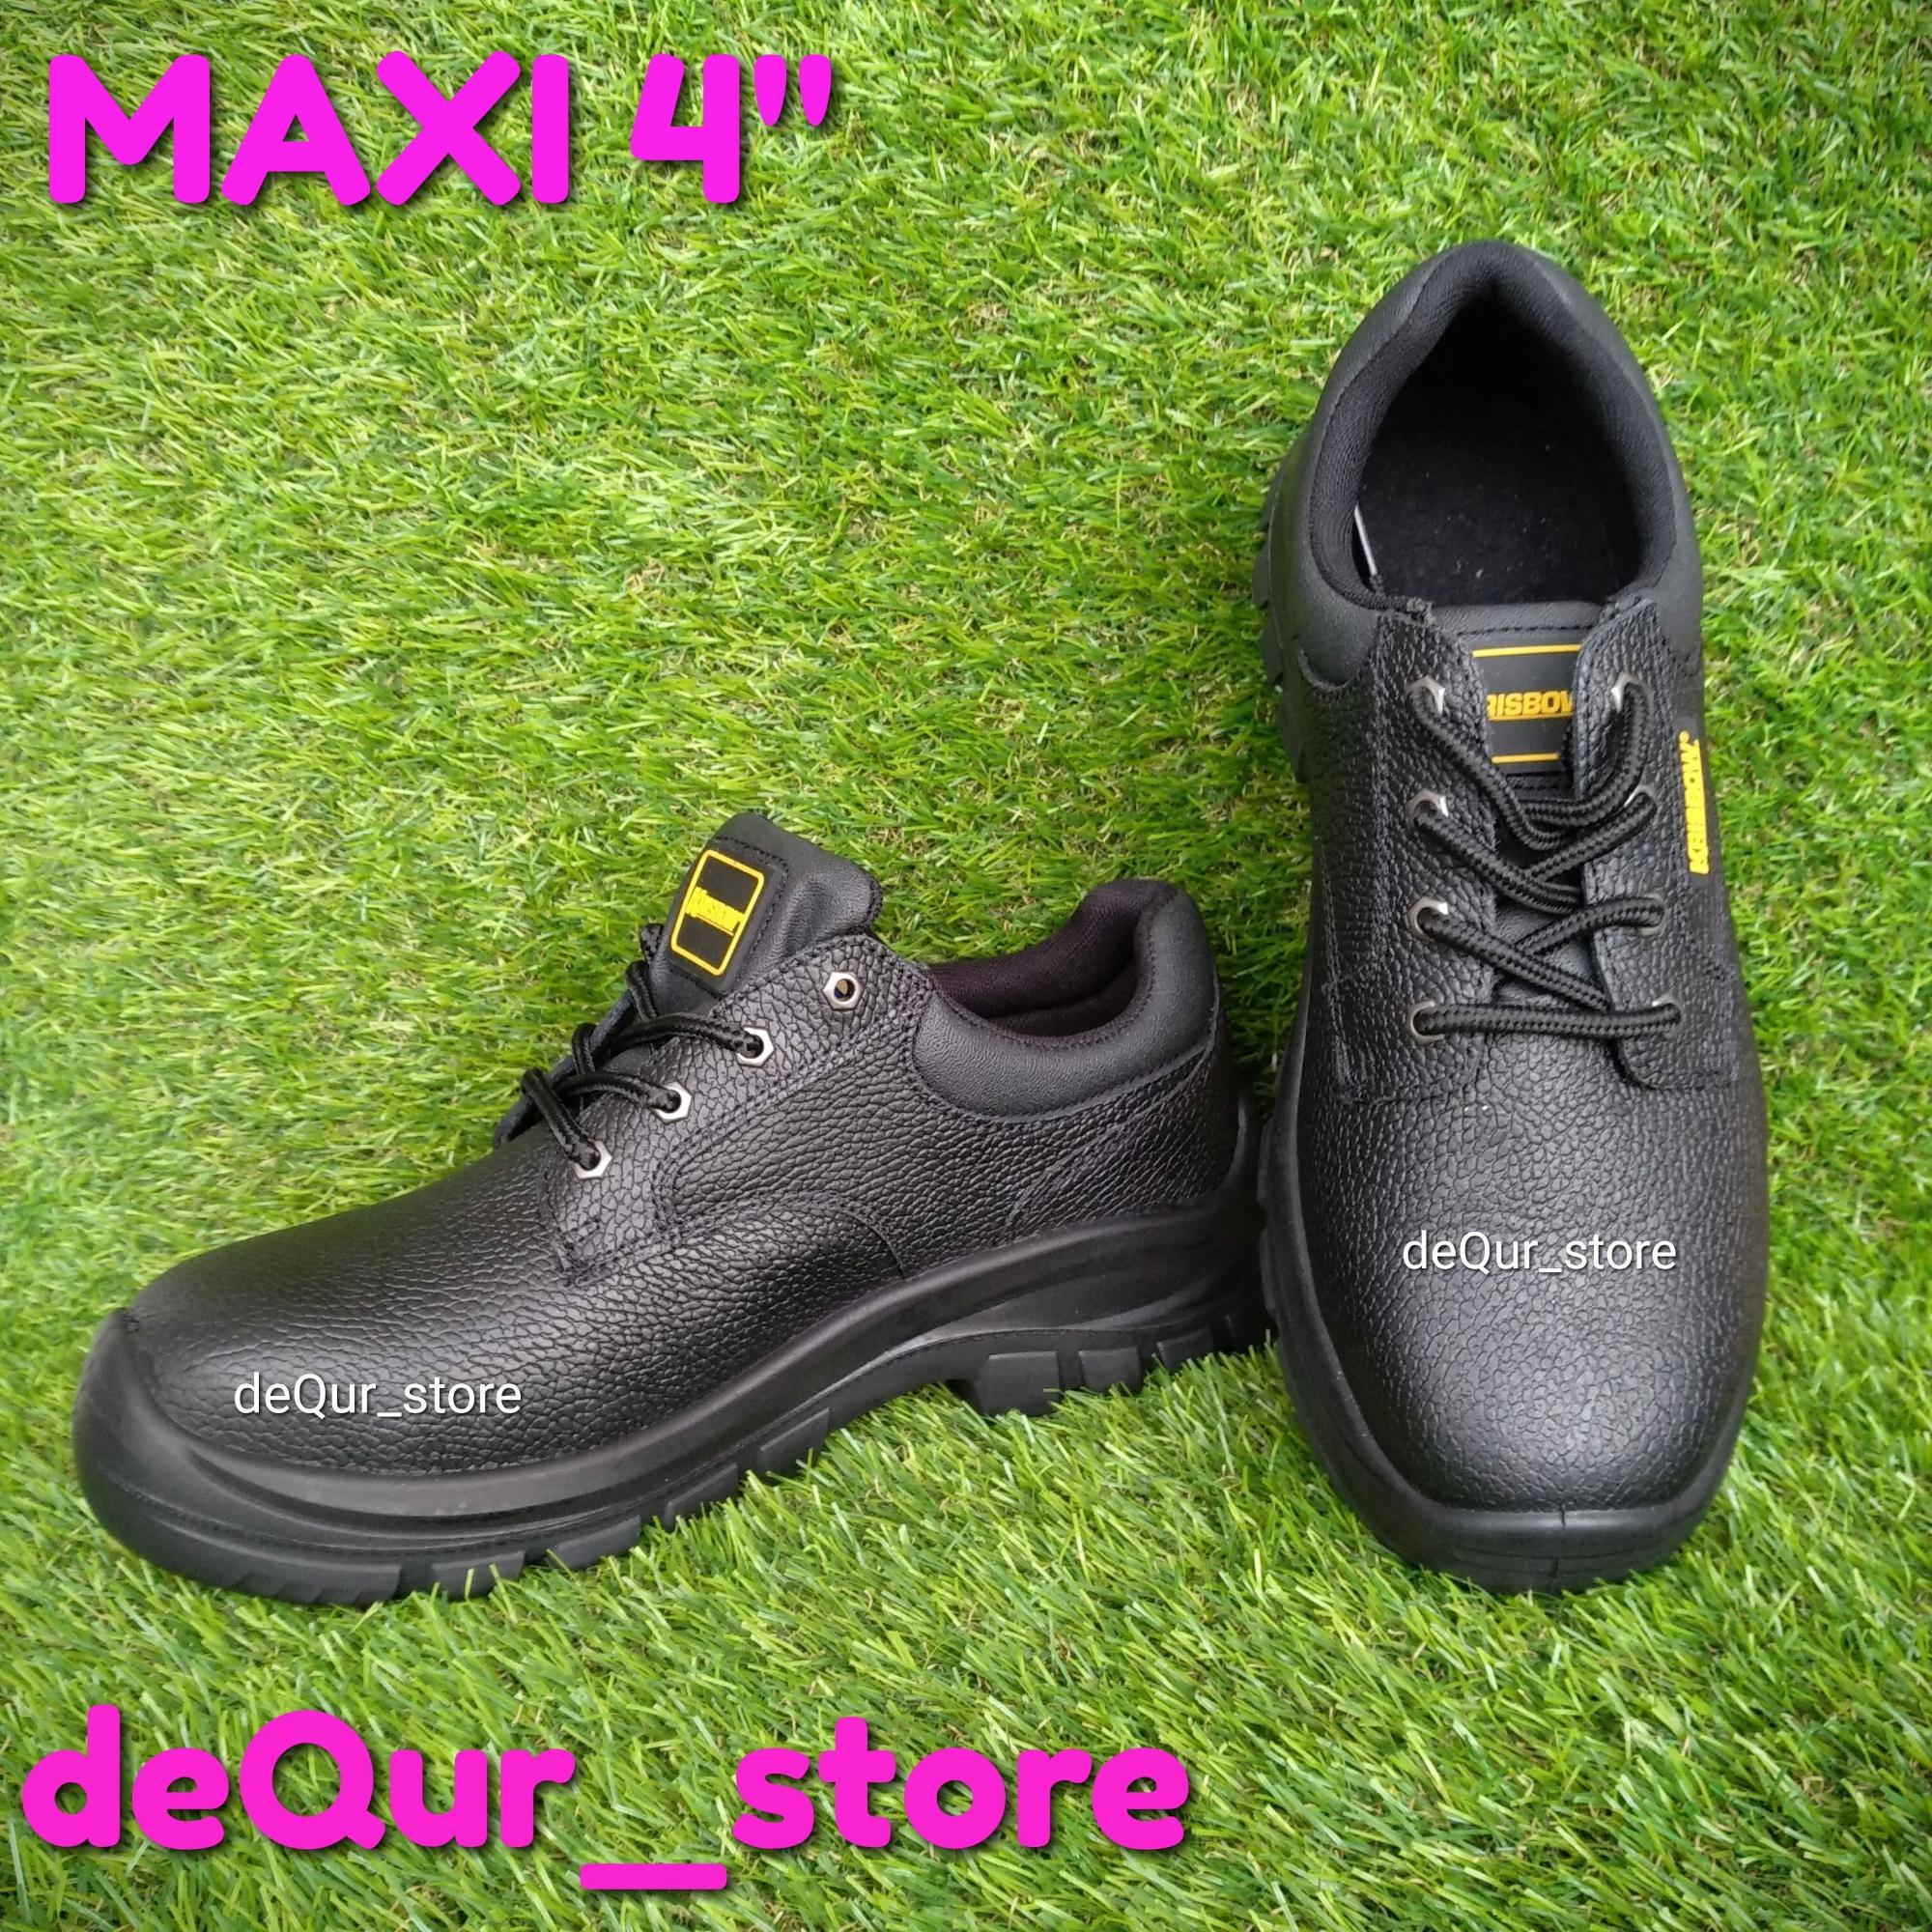 Safety shoes krisbow tipe Maxi 4 inch sepatu pengaman krisbow tipe MAXI 4 inch 